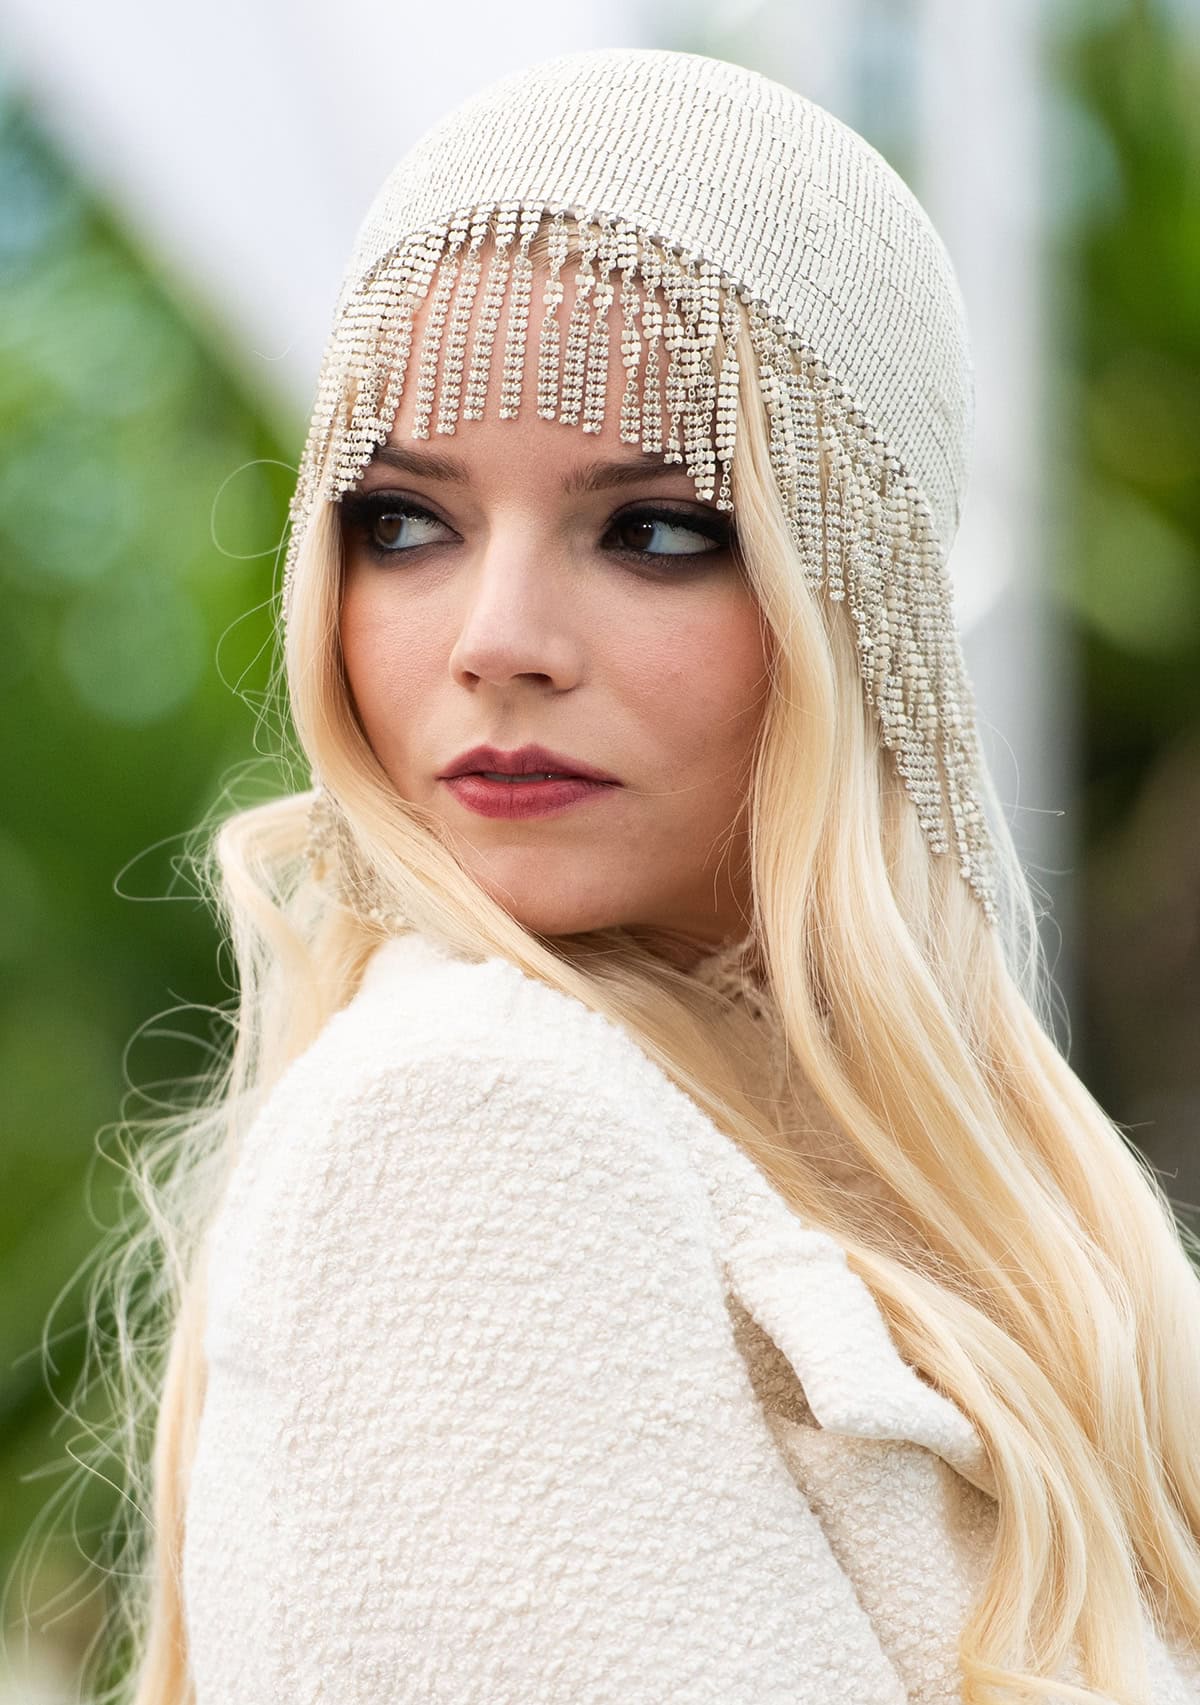 Anya Taylor-Joy embraces the 1920s with her flapper-inspired chainmail headdress with beaded fringes